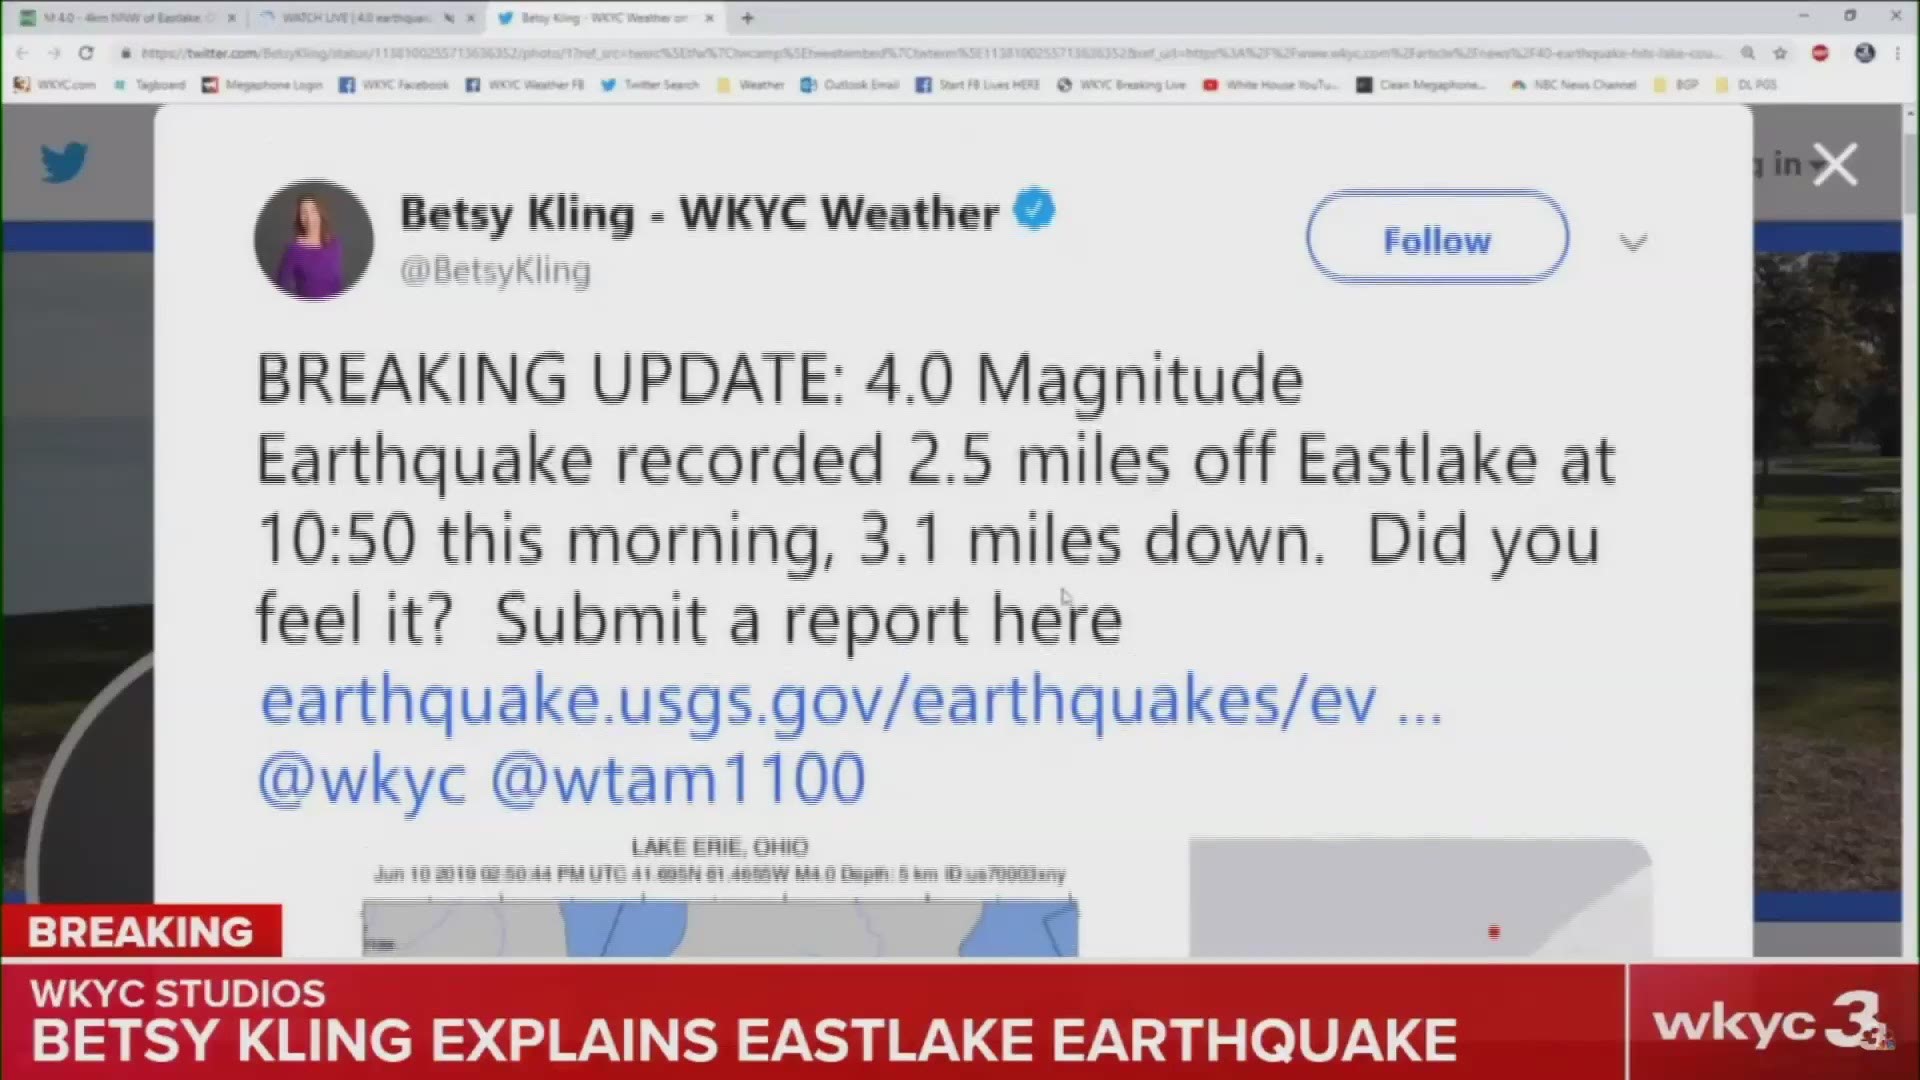 June 10, 2019: Did you feel it? WKYC Chief Meteorologist Betsy Kling confirmed a 4.0 earthquake rattled Northeast Ohio near Eastlake at 10:50 a.m. Monday. Kling said the quake itself was recorded 2.5 miles off Eastlake 3.1 miles deep.